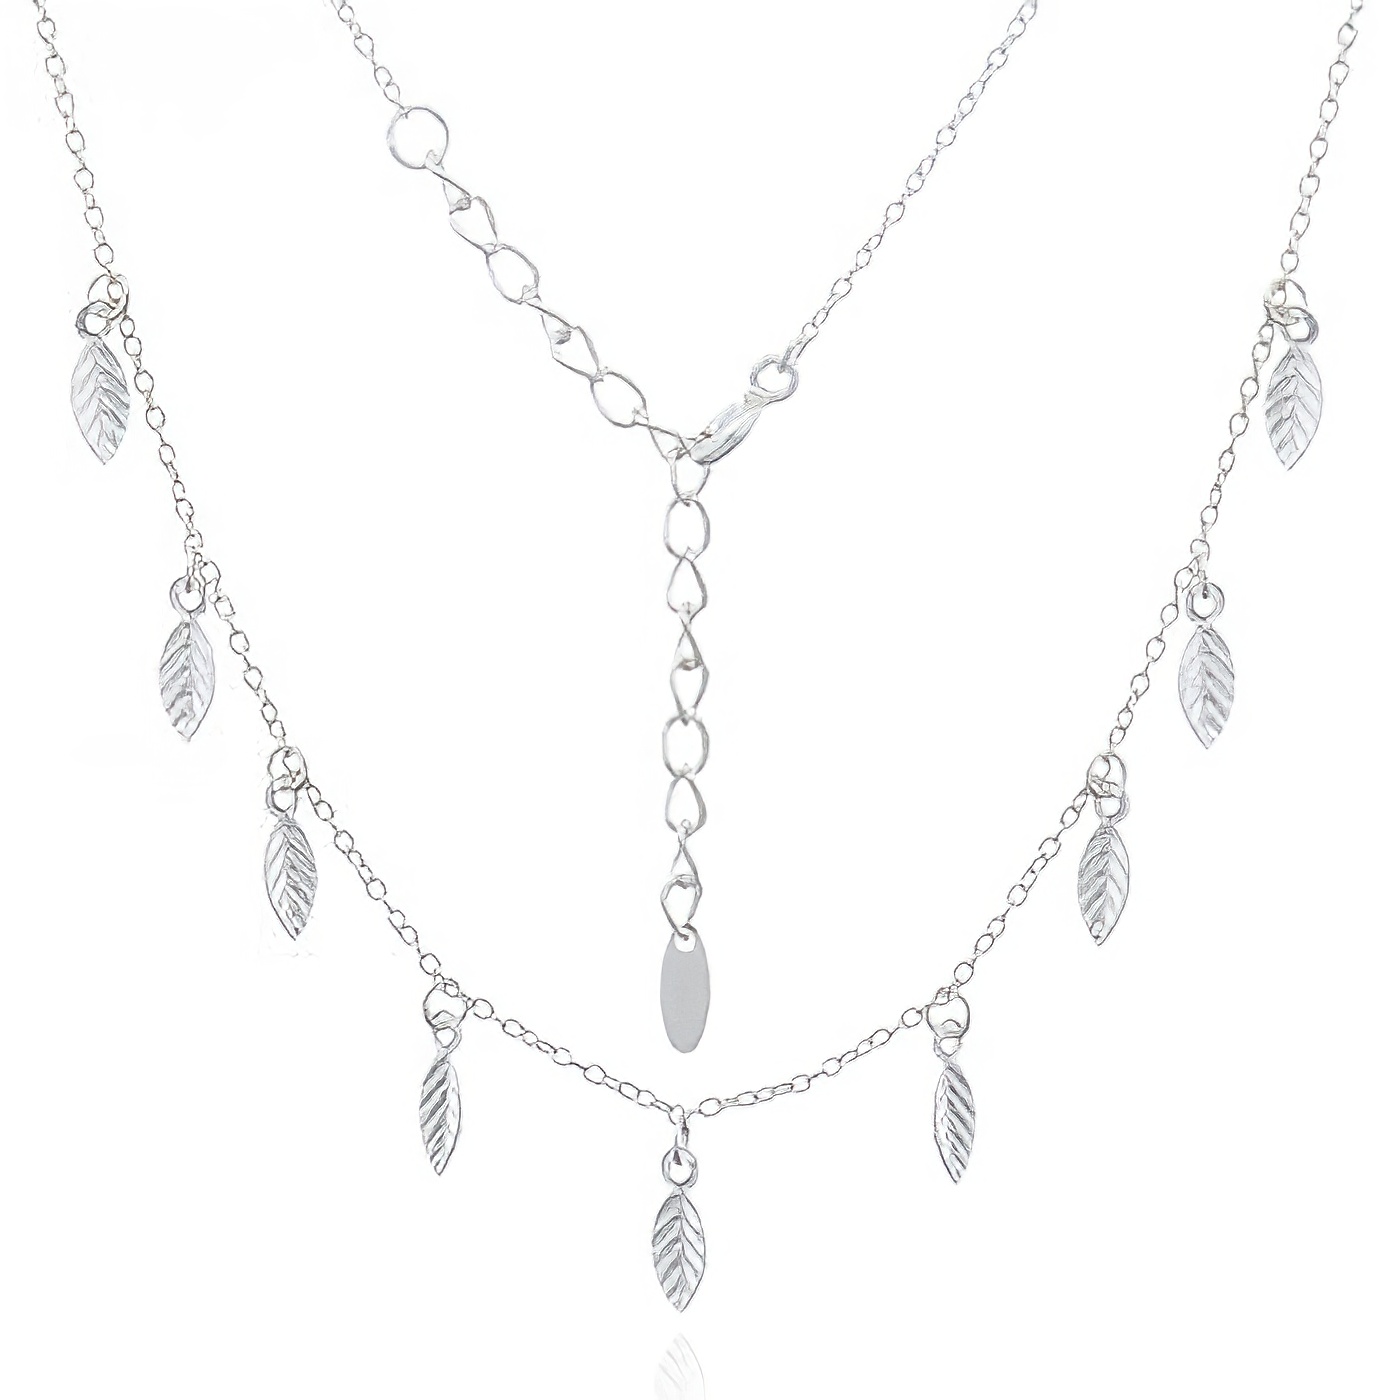 Fallen Leaves 925 Sterling Silver Chain Necklace by BeYindi 